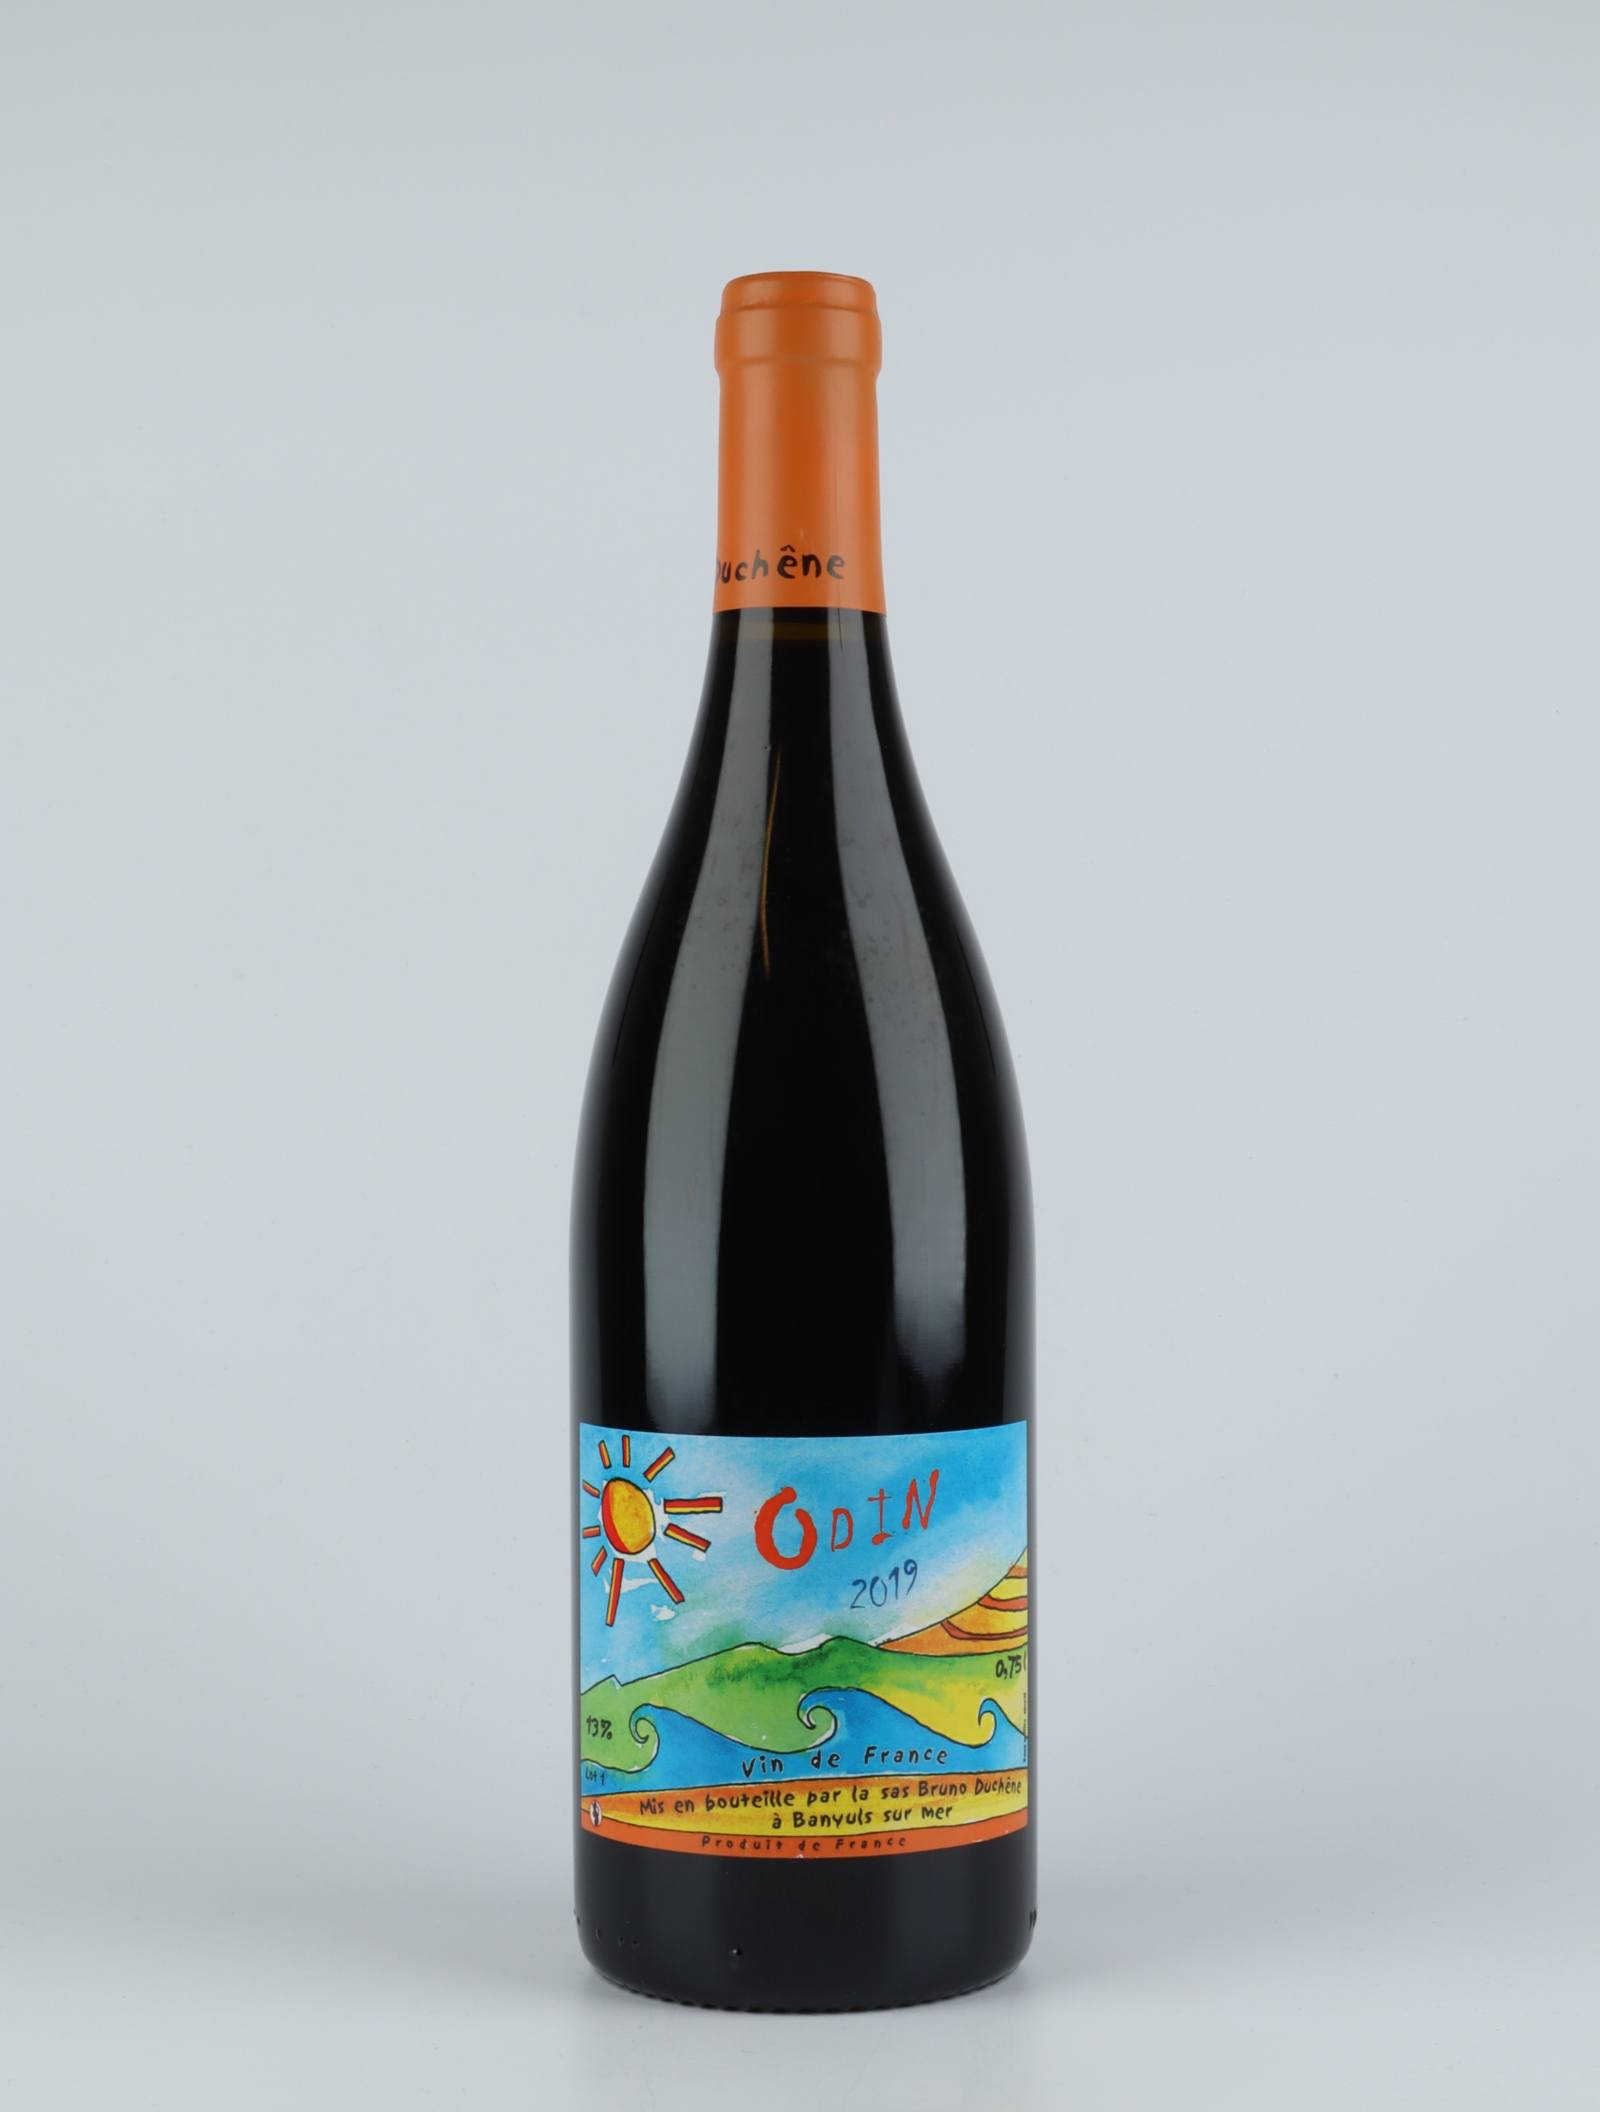 A bottle 2019 Odin Red wine from Bruno Duchêne, Rousillon in France